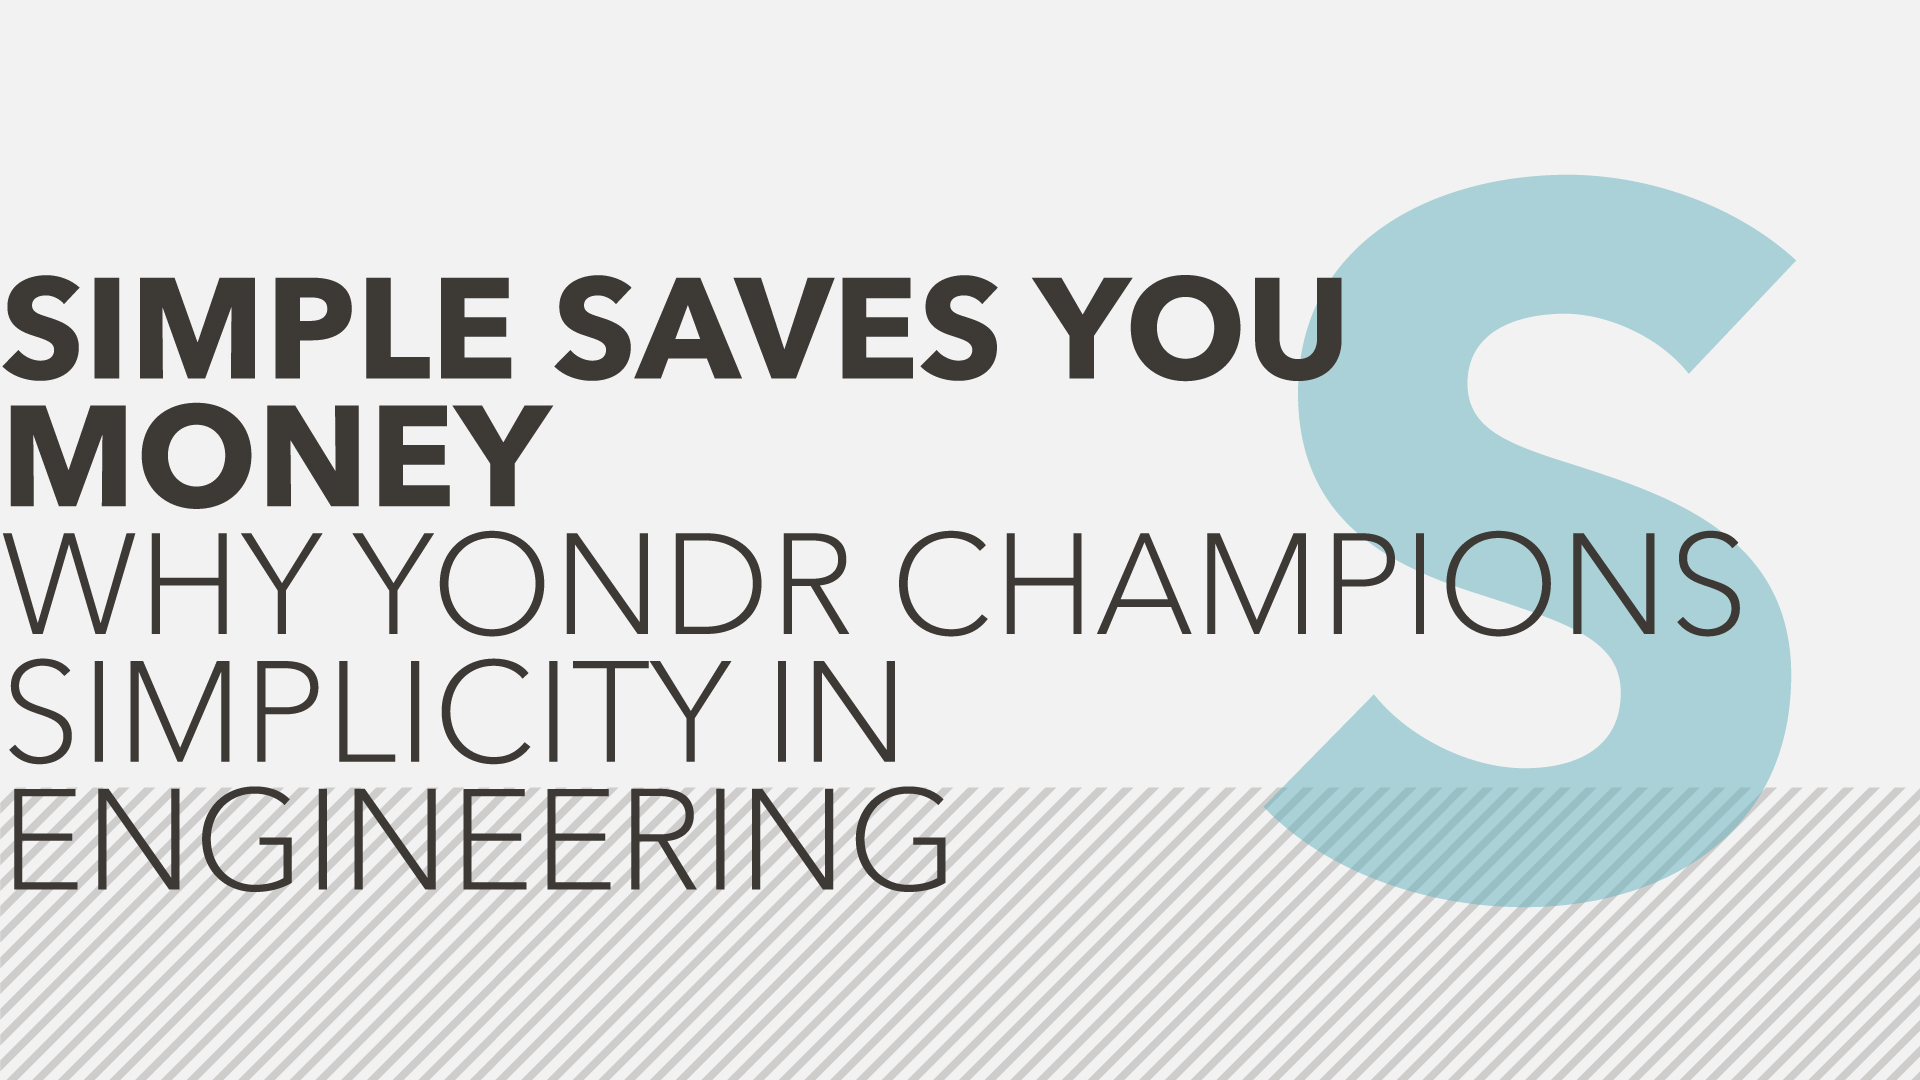 Simple saves you money. Why Yondr champions simplicity in engineering